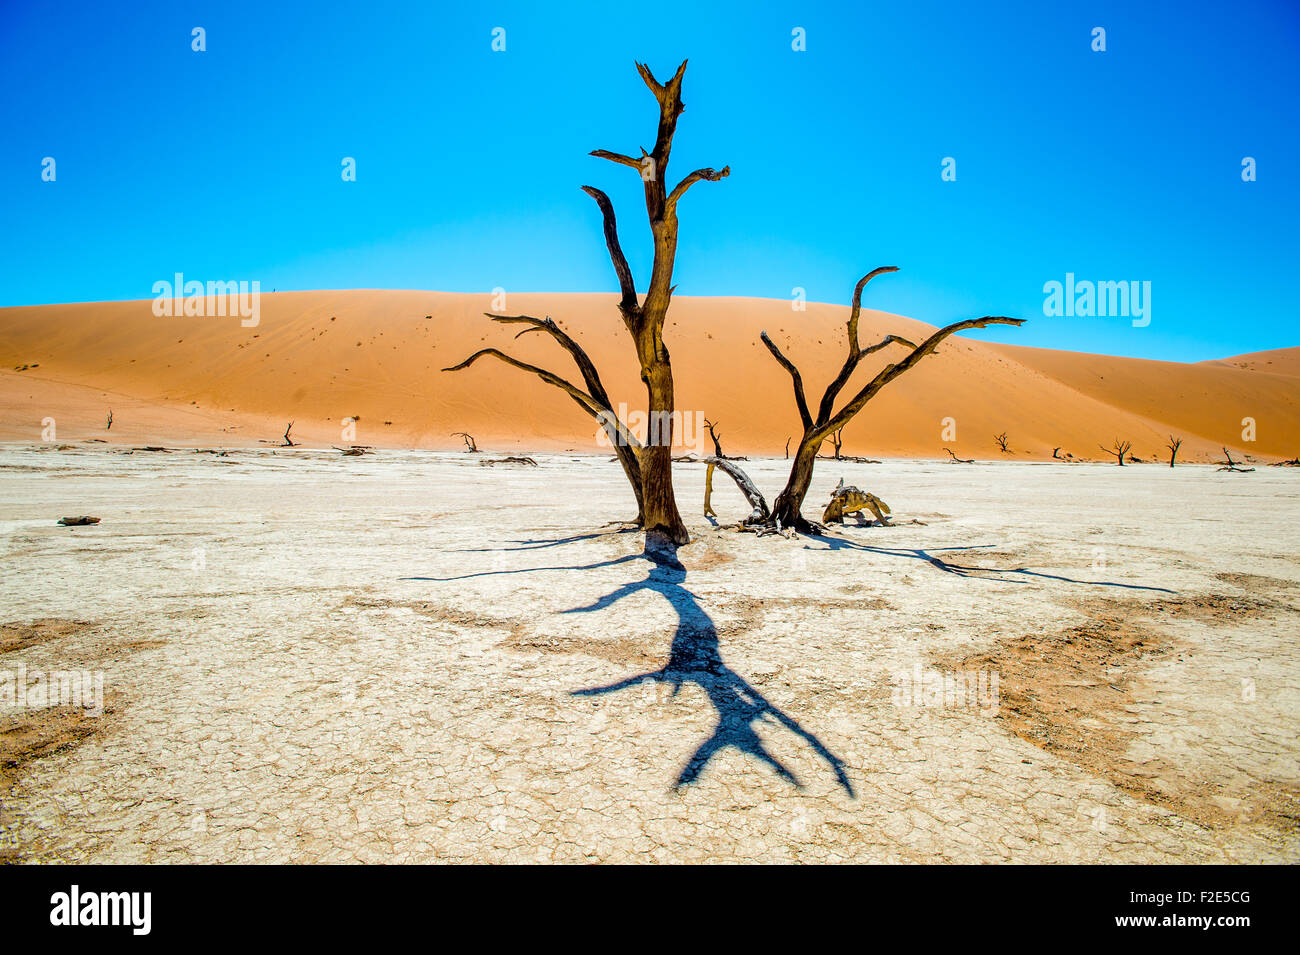 Sossusvlei Namibia - Dead vlei pan and its famous camel thorn trees Stock Photo